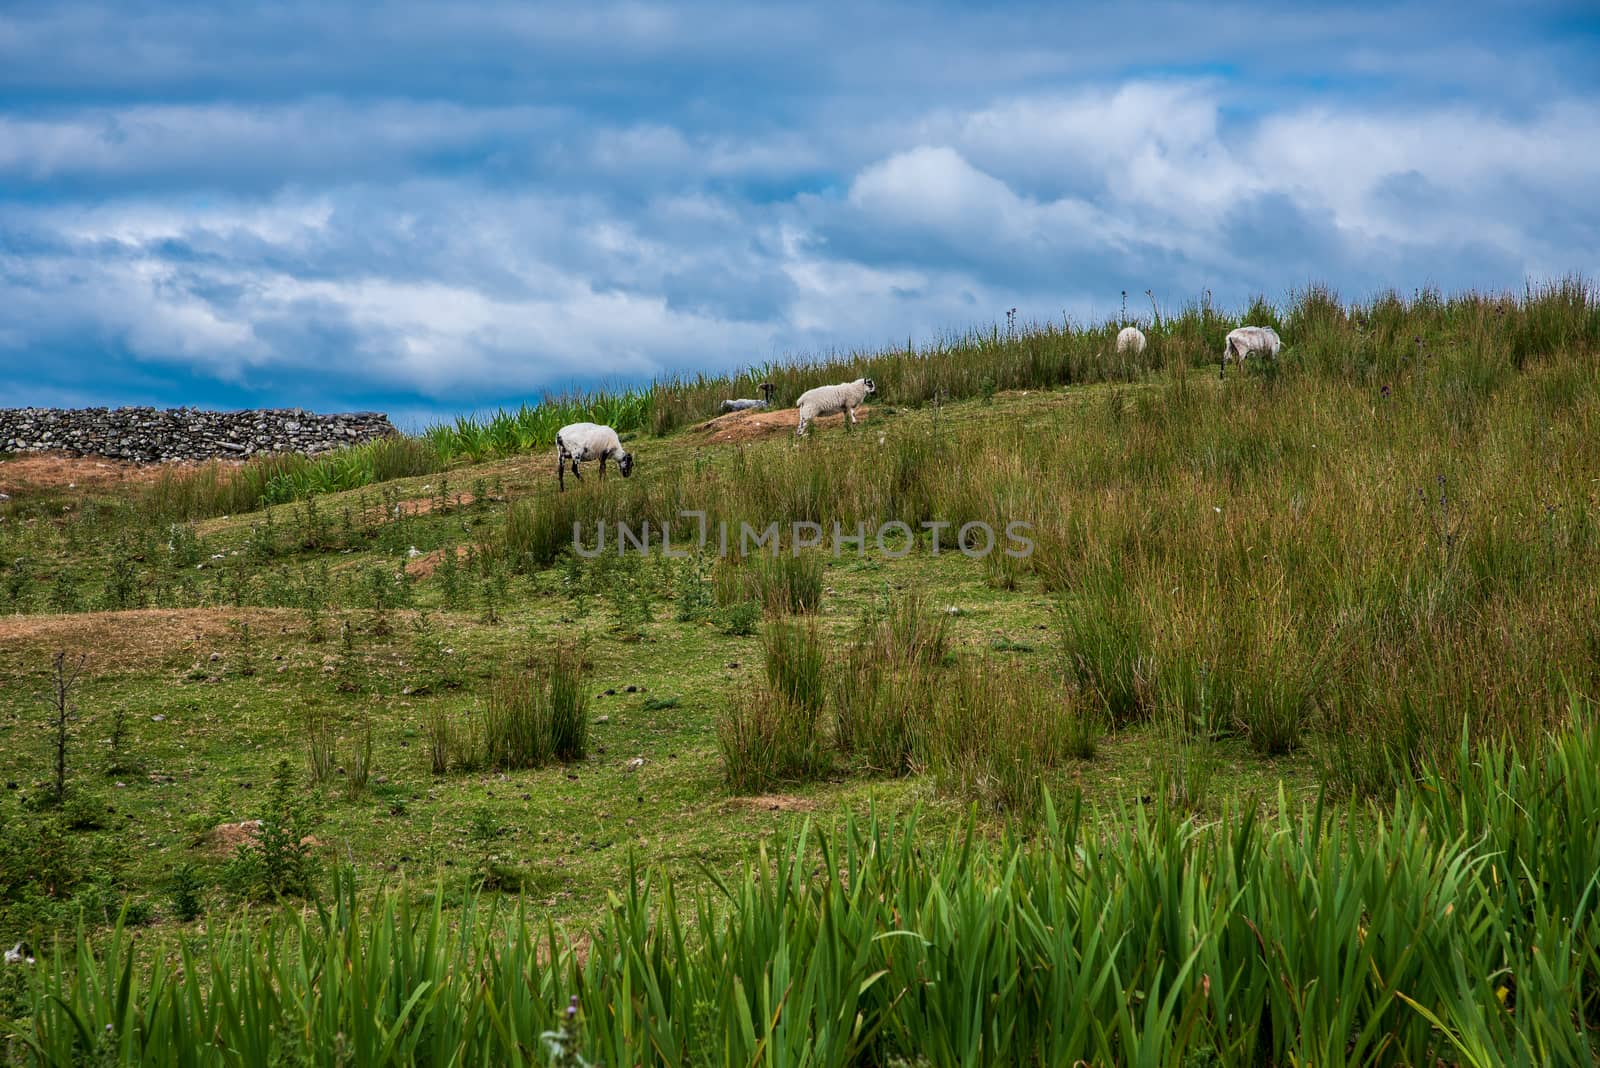 Sheep and goats climbing a hill with tall green grasses and a stone wall toward the top.